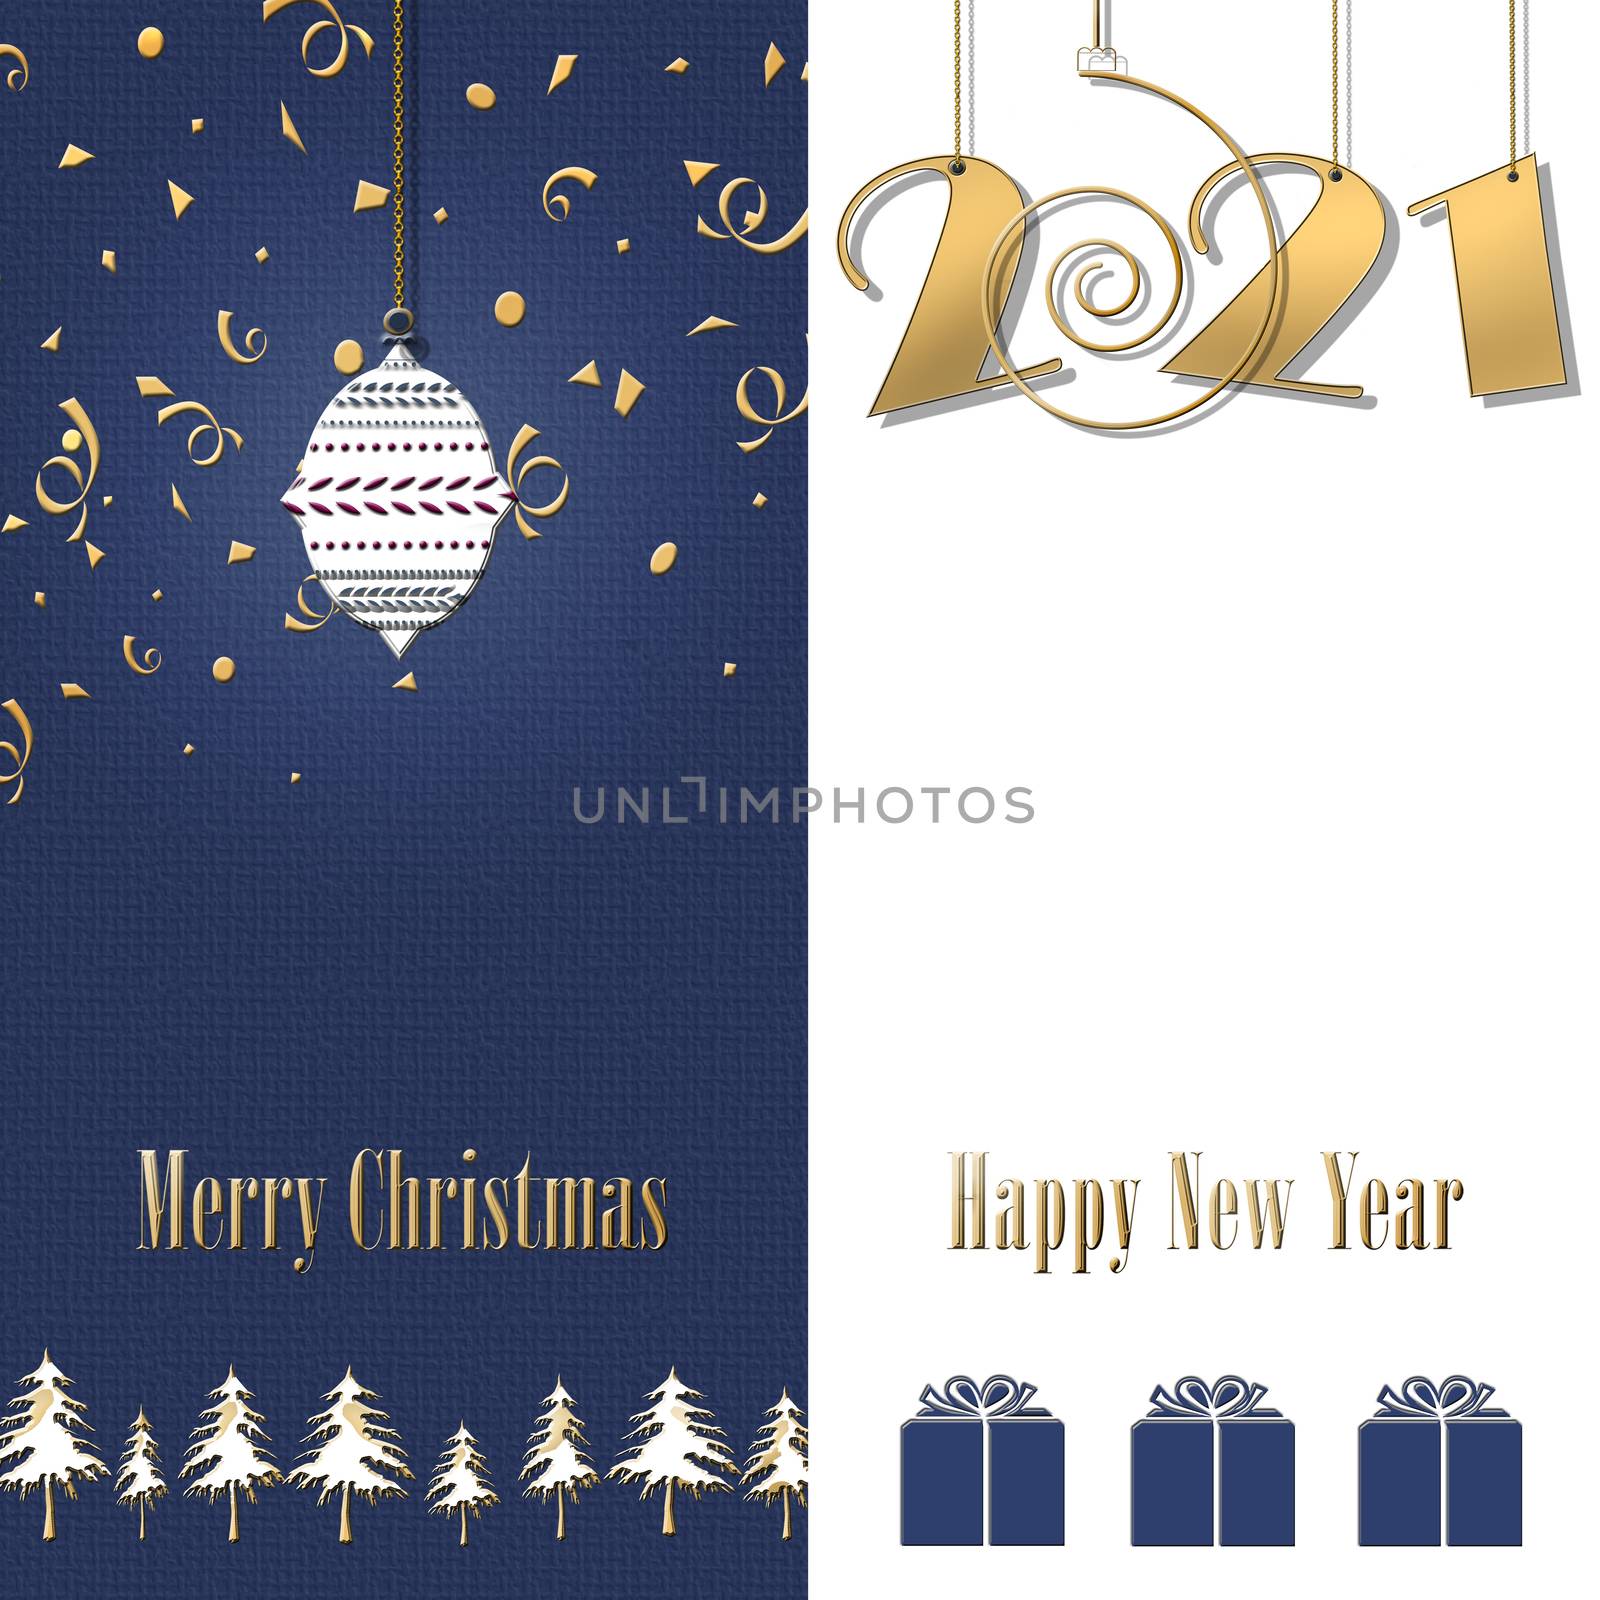 2021 happy New Year blue white background with gold confetti and Christmas trees. Glowing hanging gold number 2021. Winter holiday greeting card. Copy space. Business card. 3D illustration